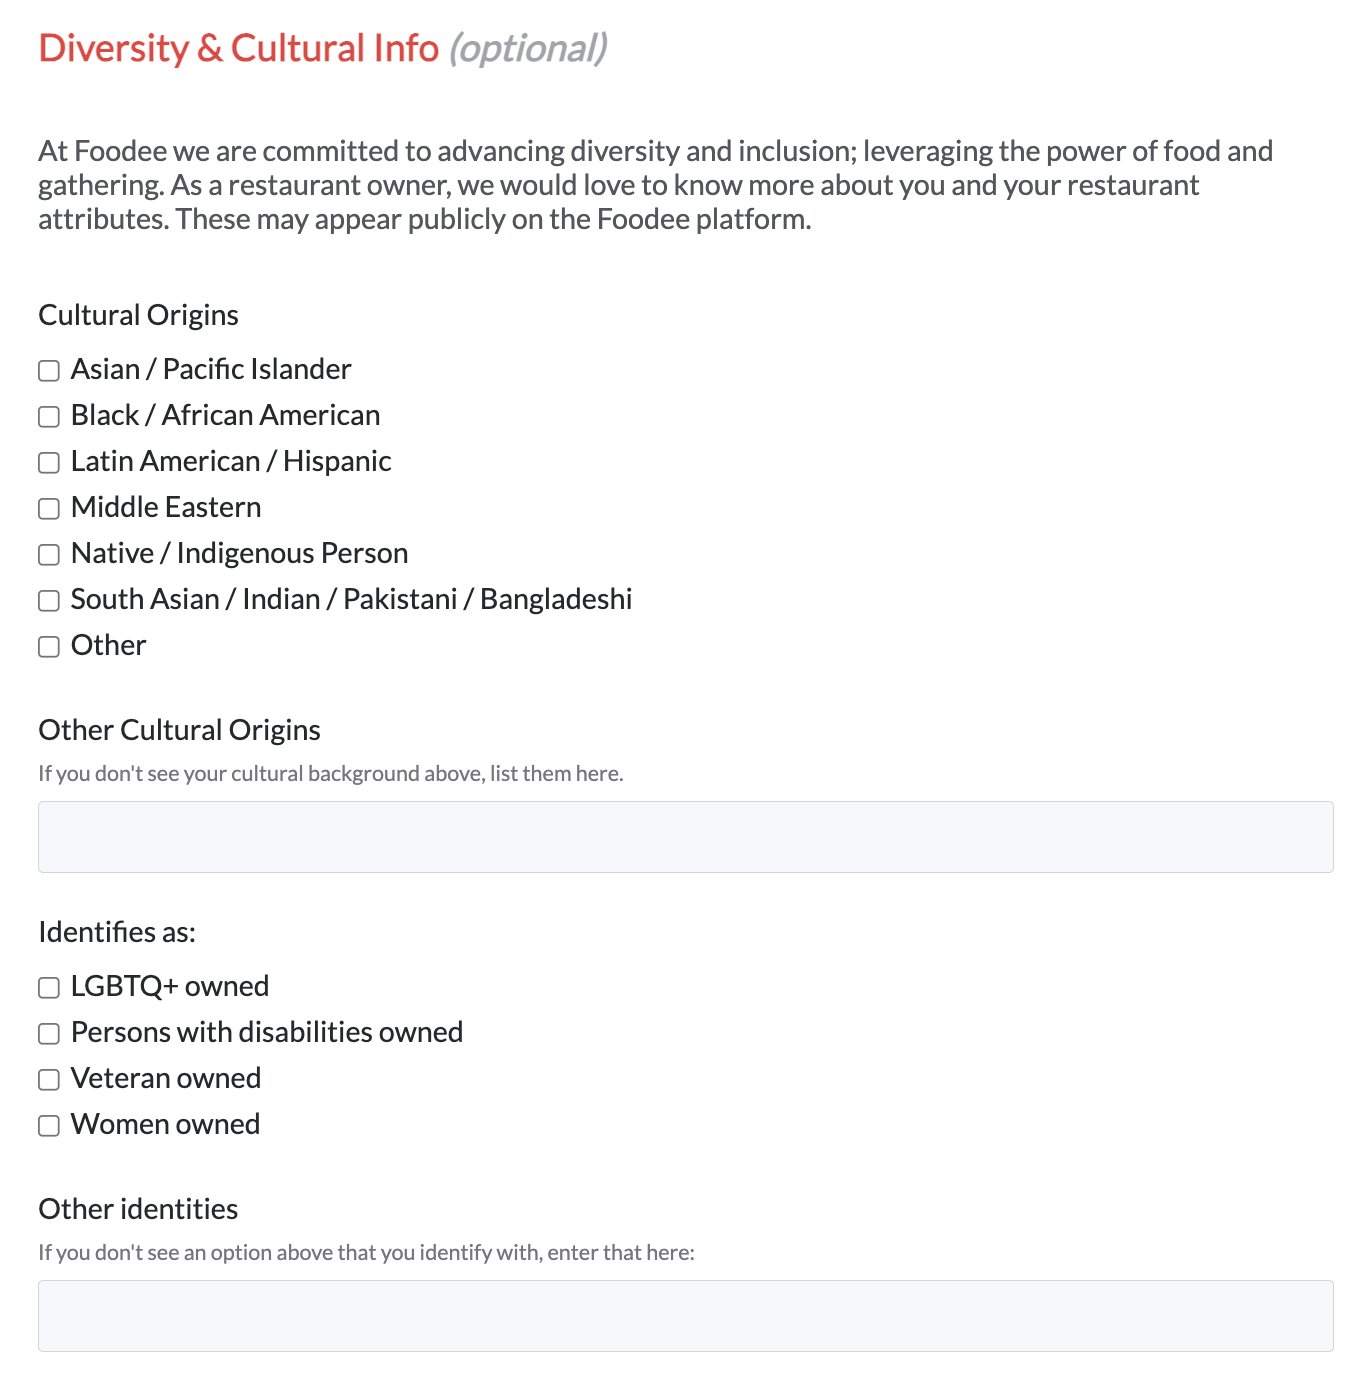 Screenshot of an optional section on the Foodee Partner form about diversity and cultural information